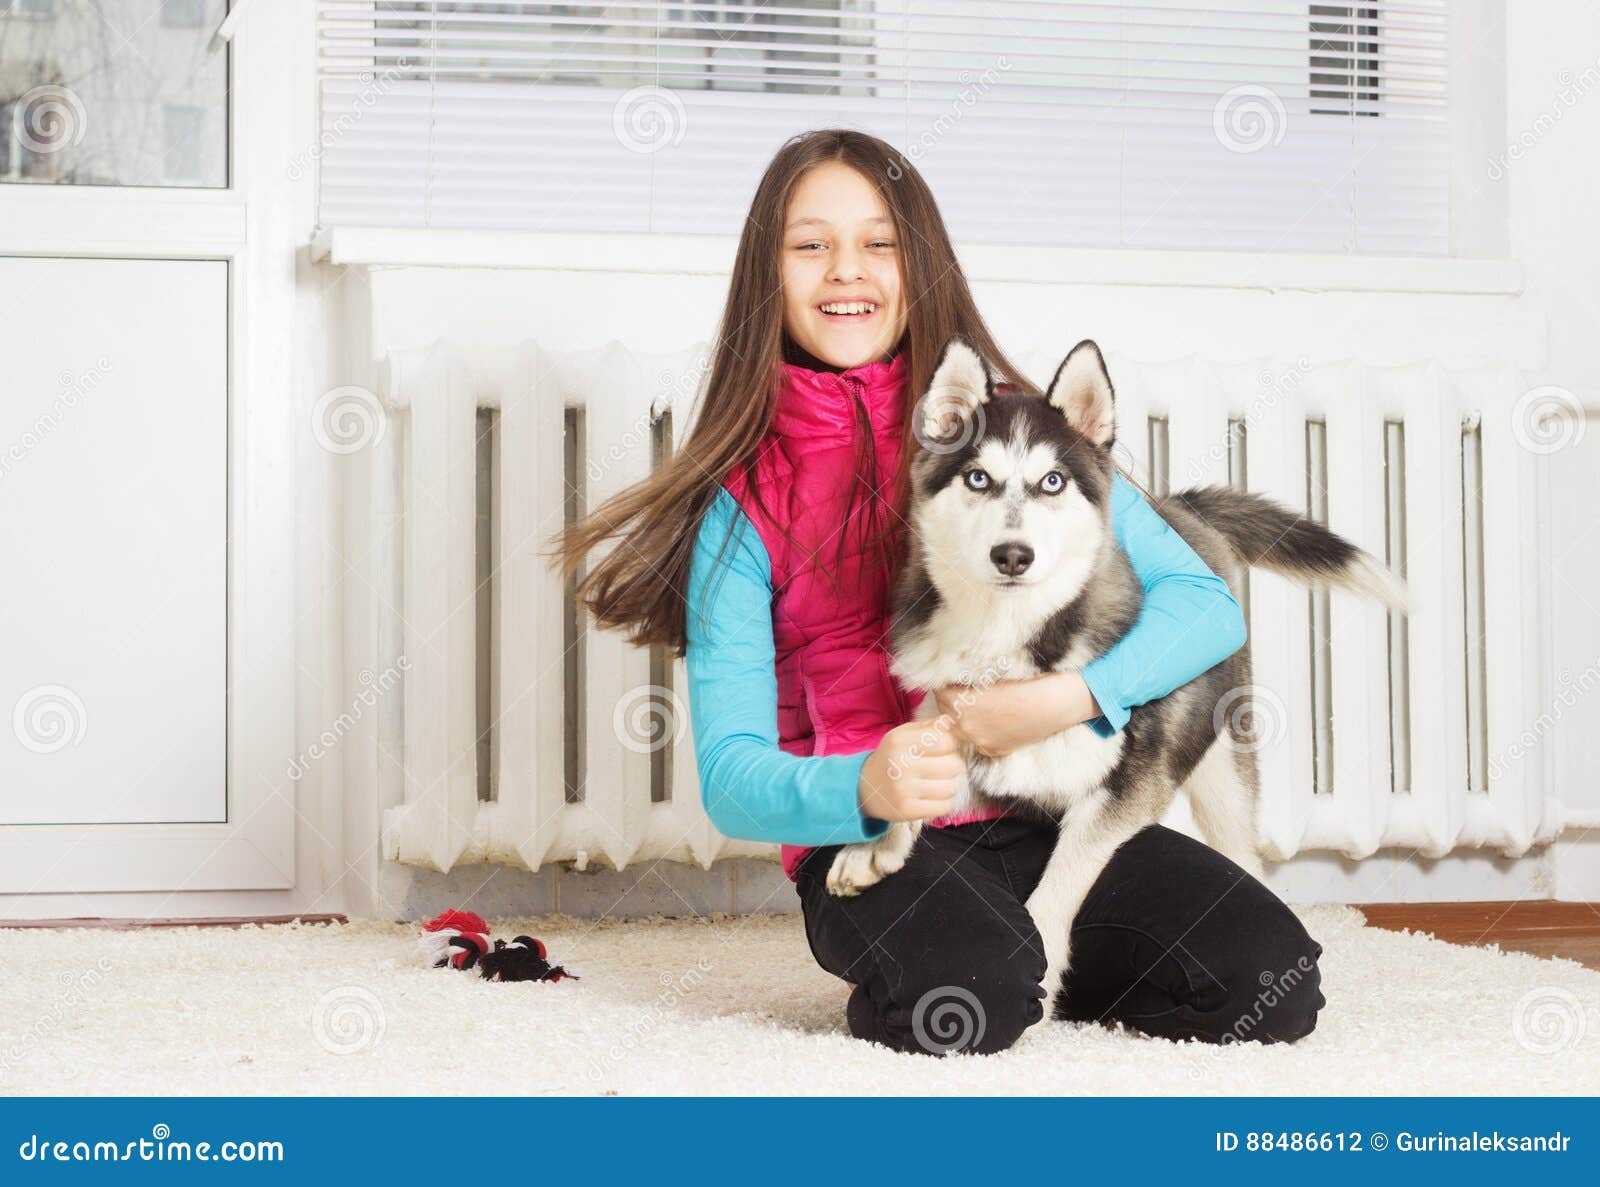 Modern Apartments That Allow Siberian Huskies for Living room